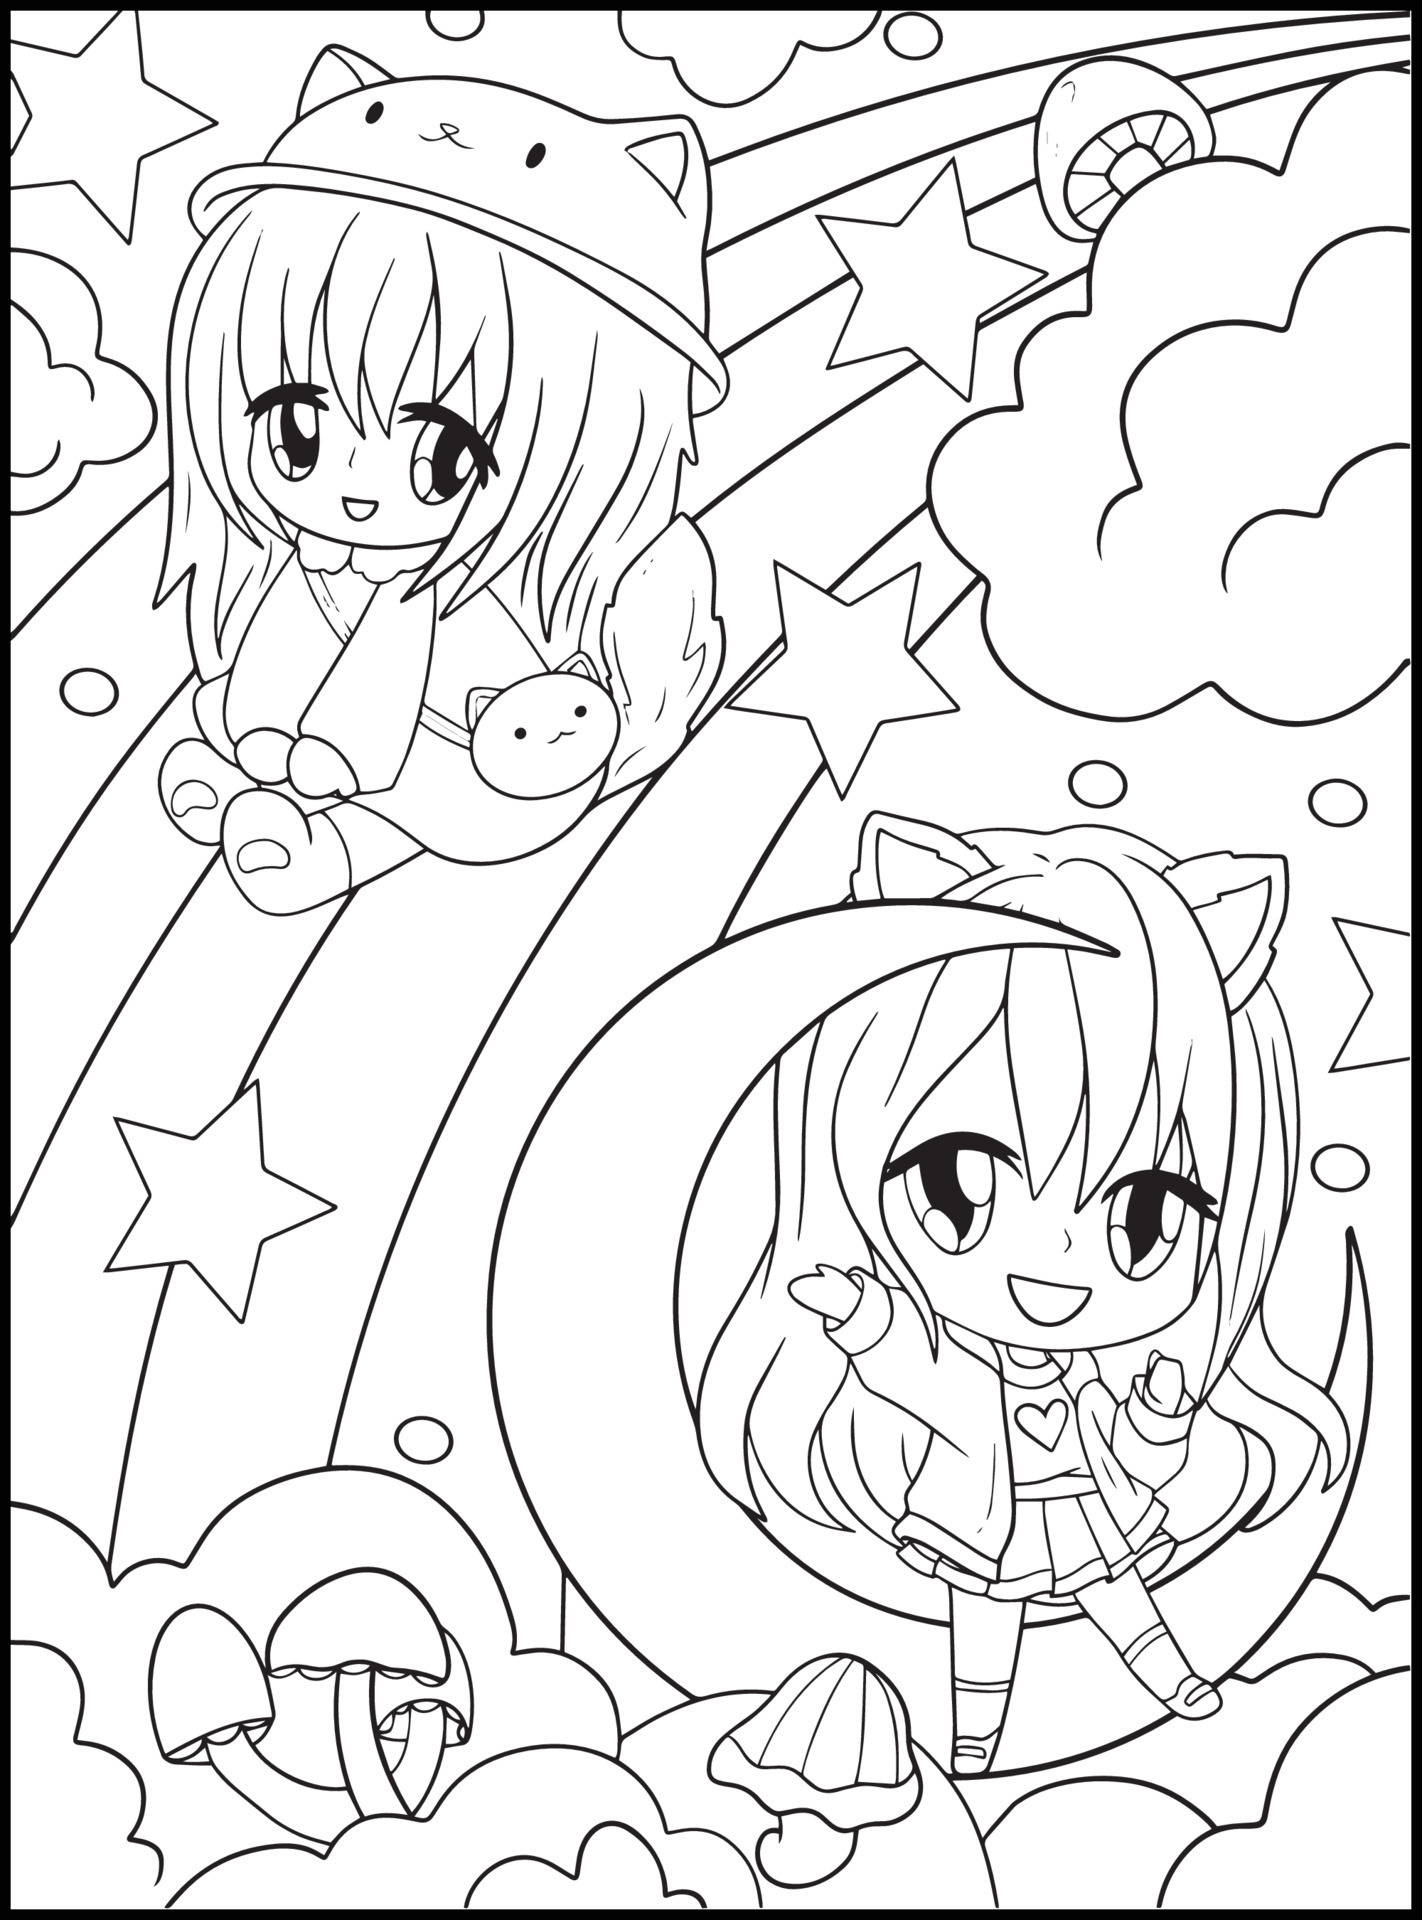 Gacha Life Coloring Pages Printable for Free Download